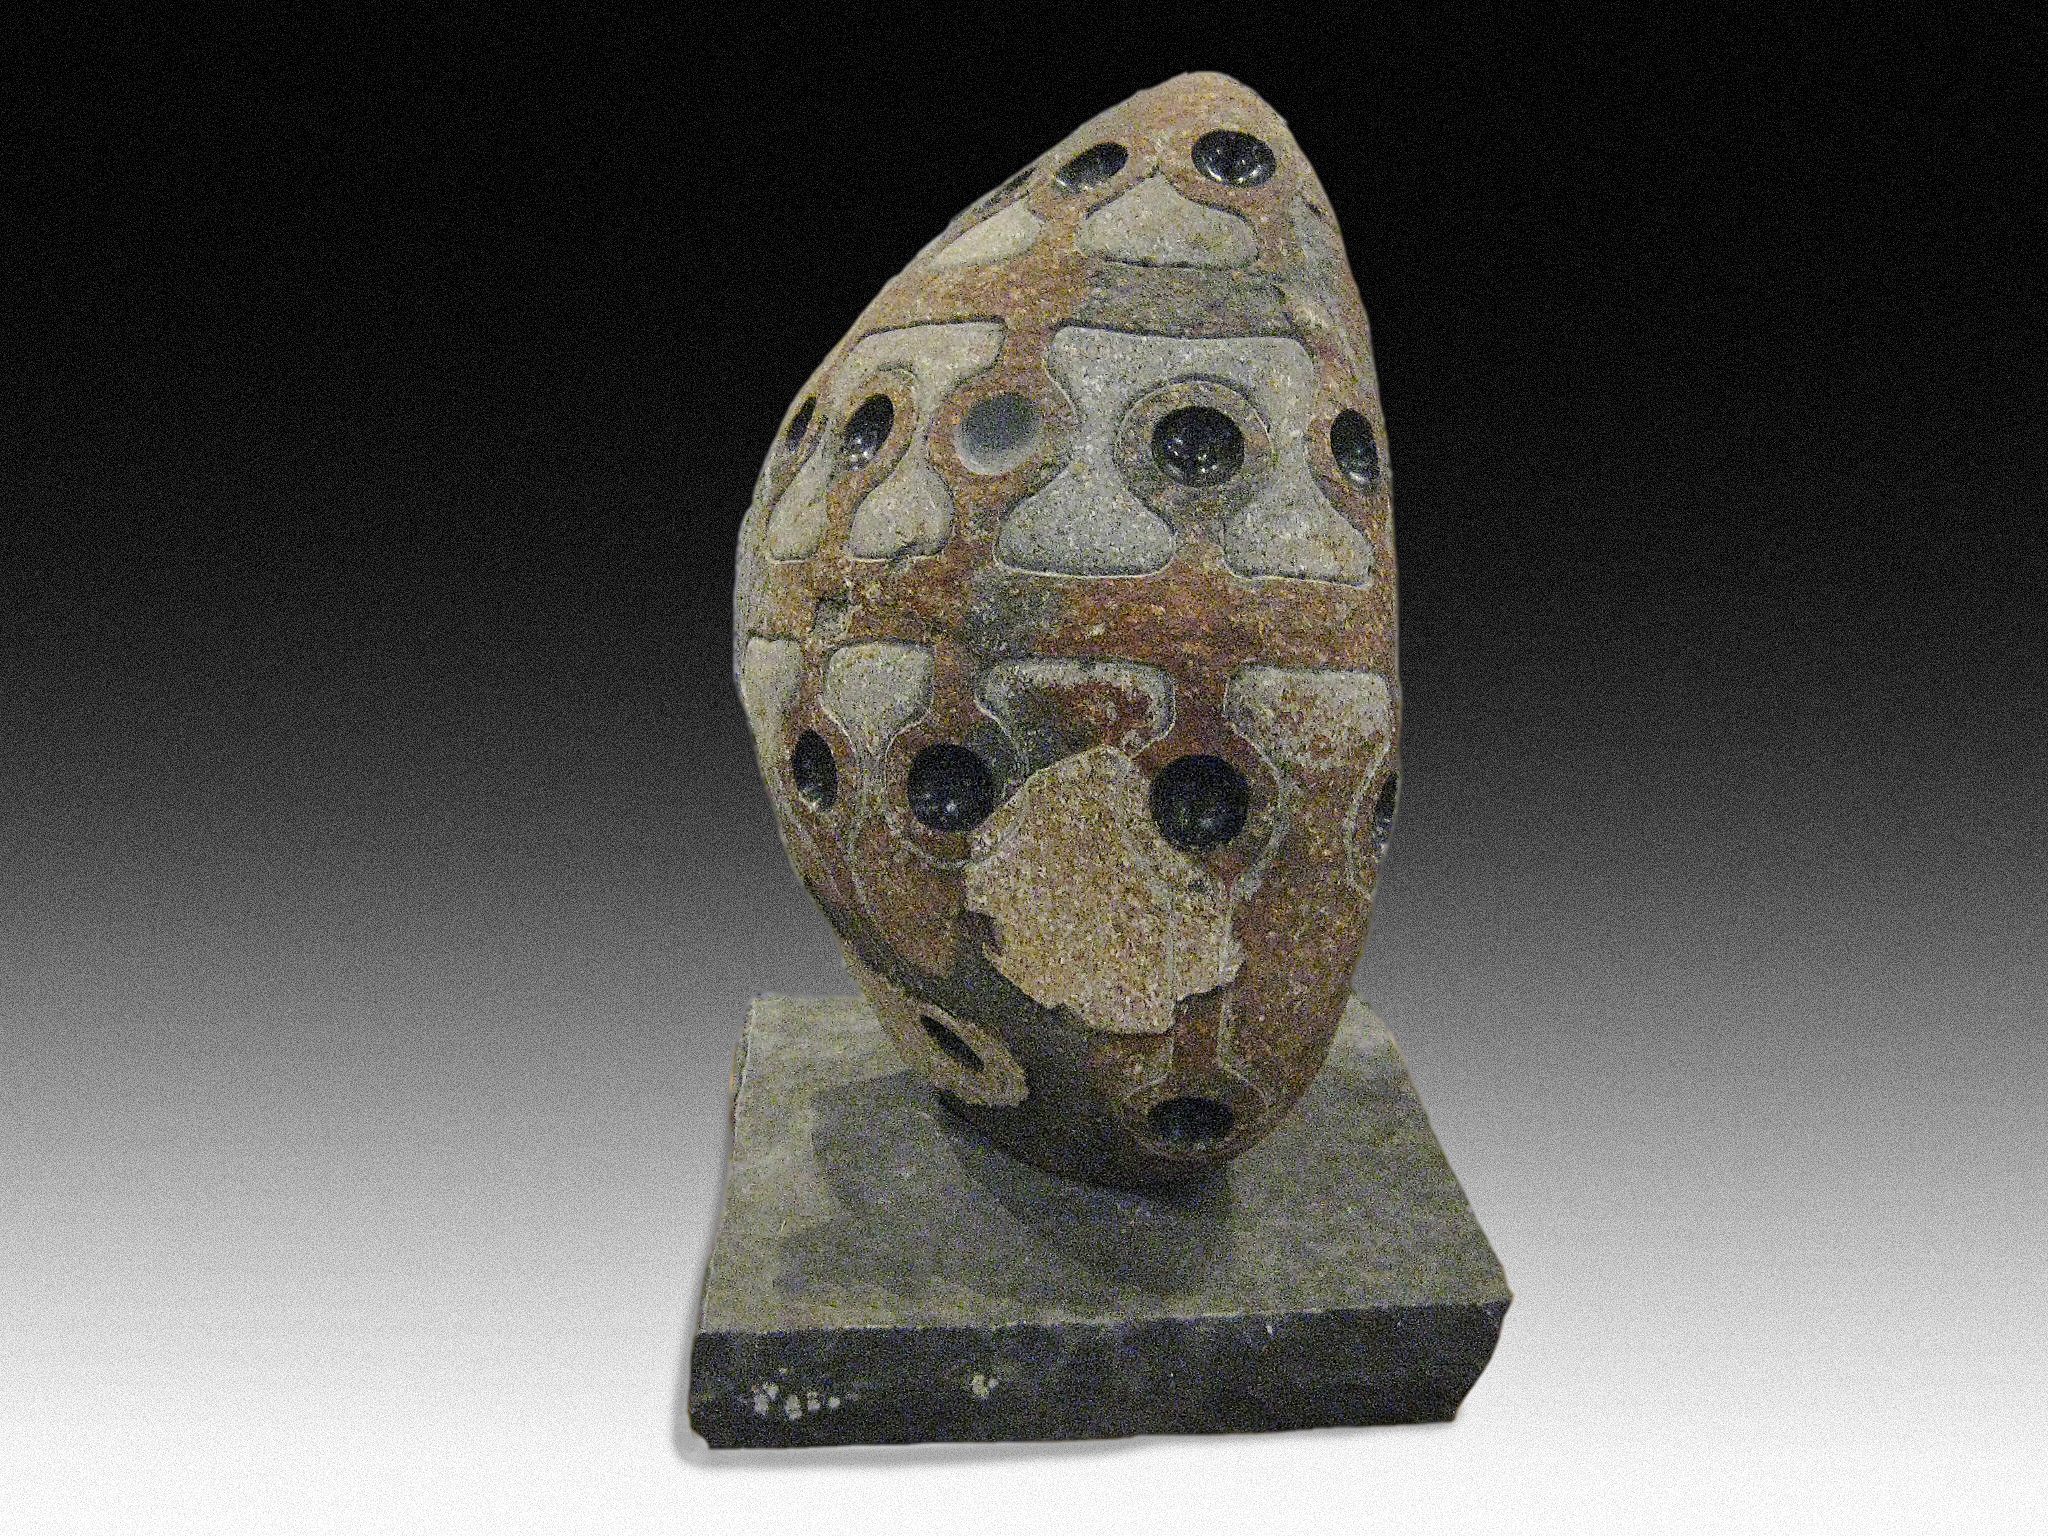 “Primal 2”, igneous river rock, 20” tall, 2014 This piece lives in Manhattan now. The client didn’t even ask for the price. She liked it and just took it whatever the price. I need more clients like her…